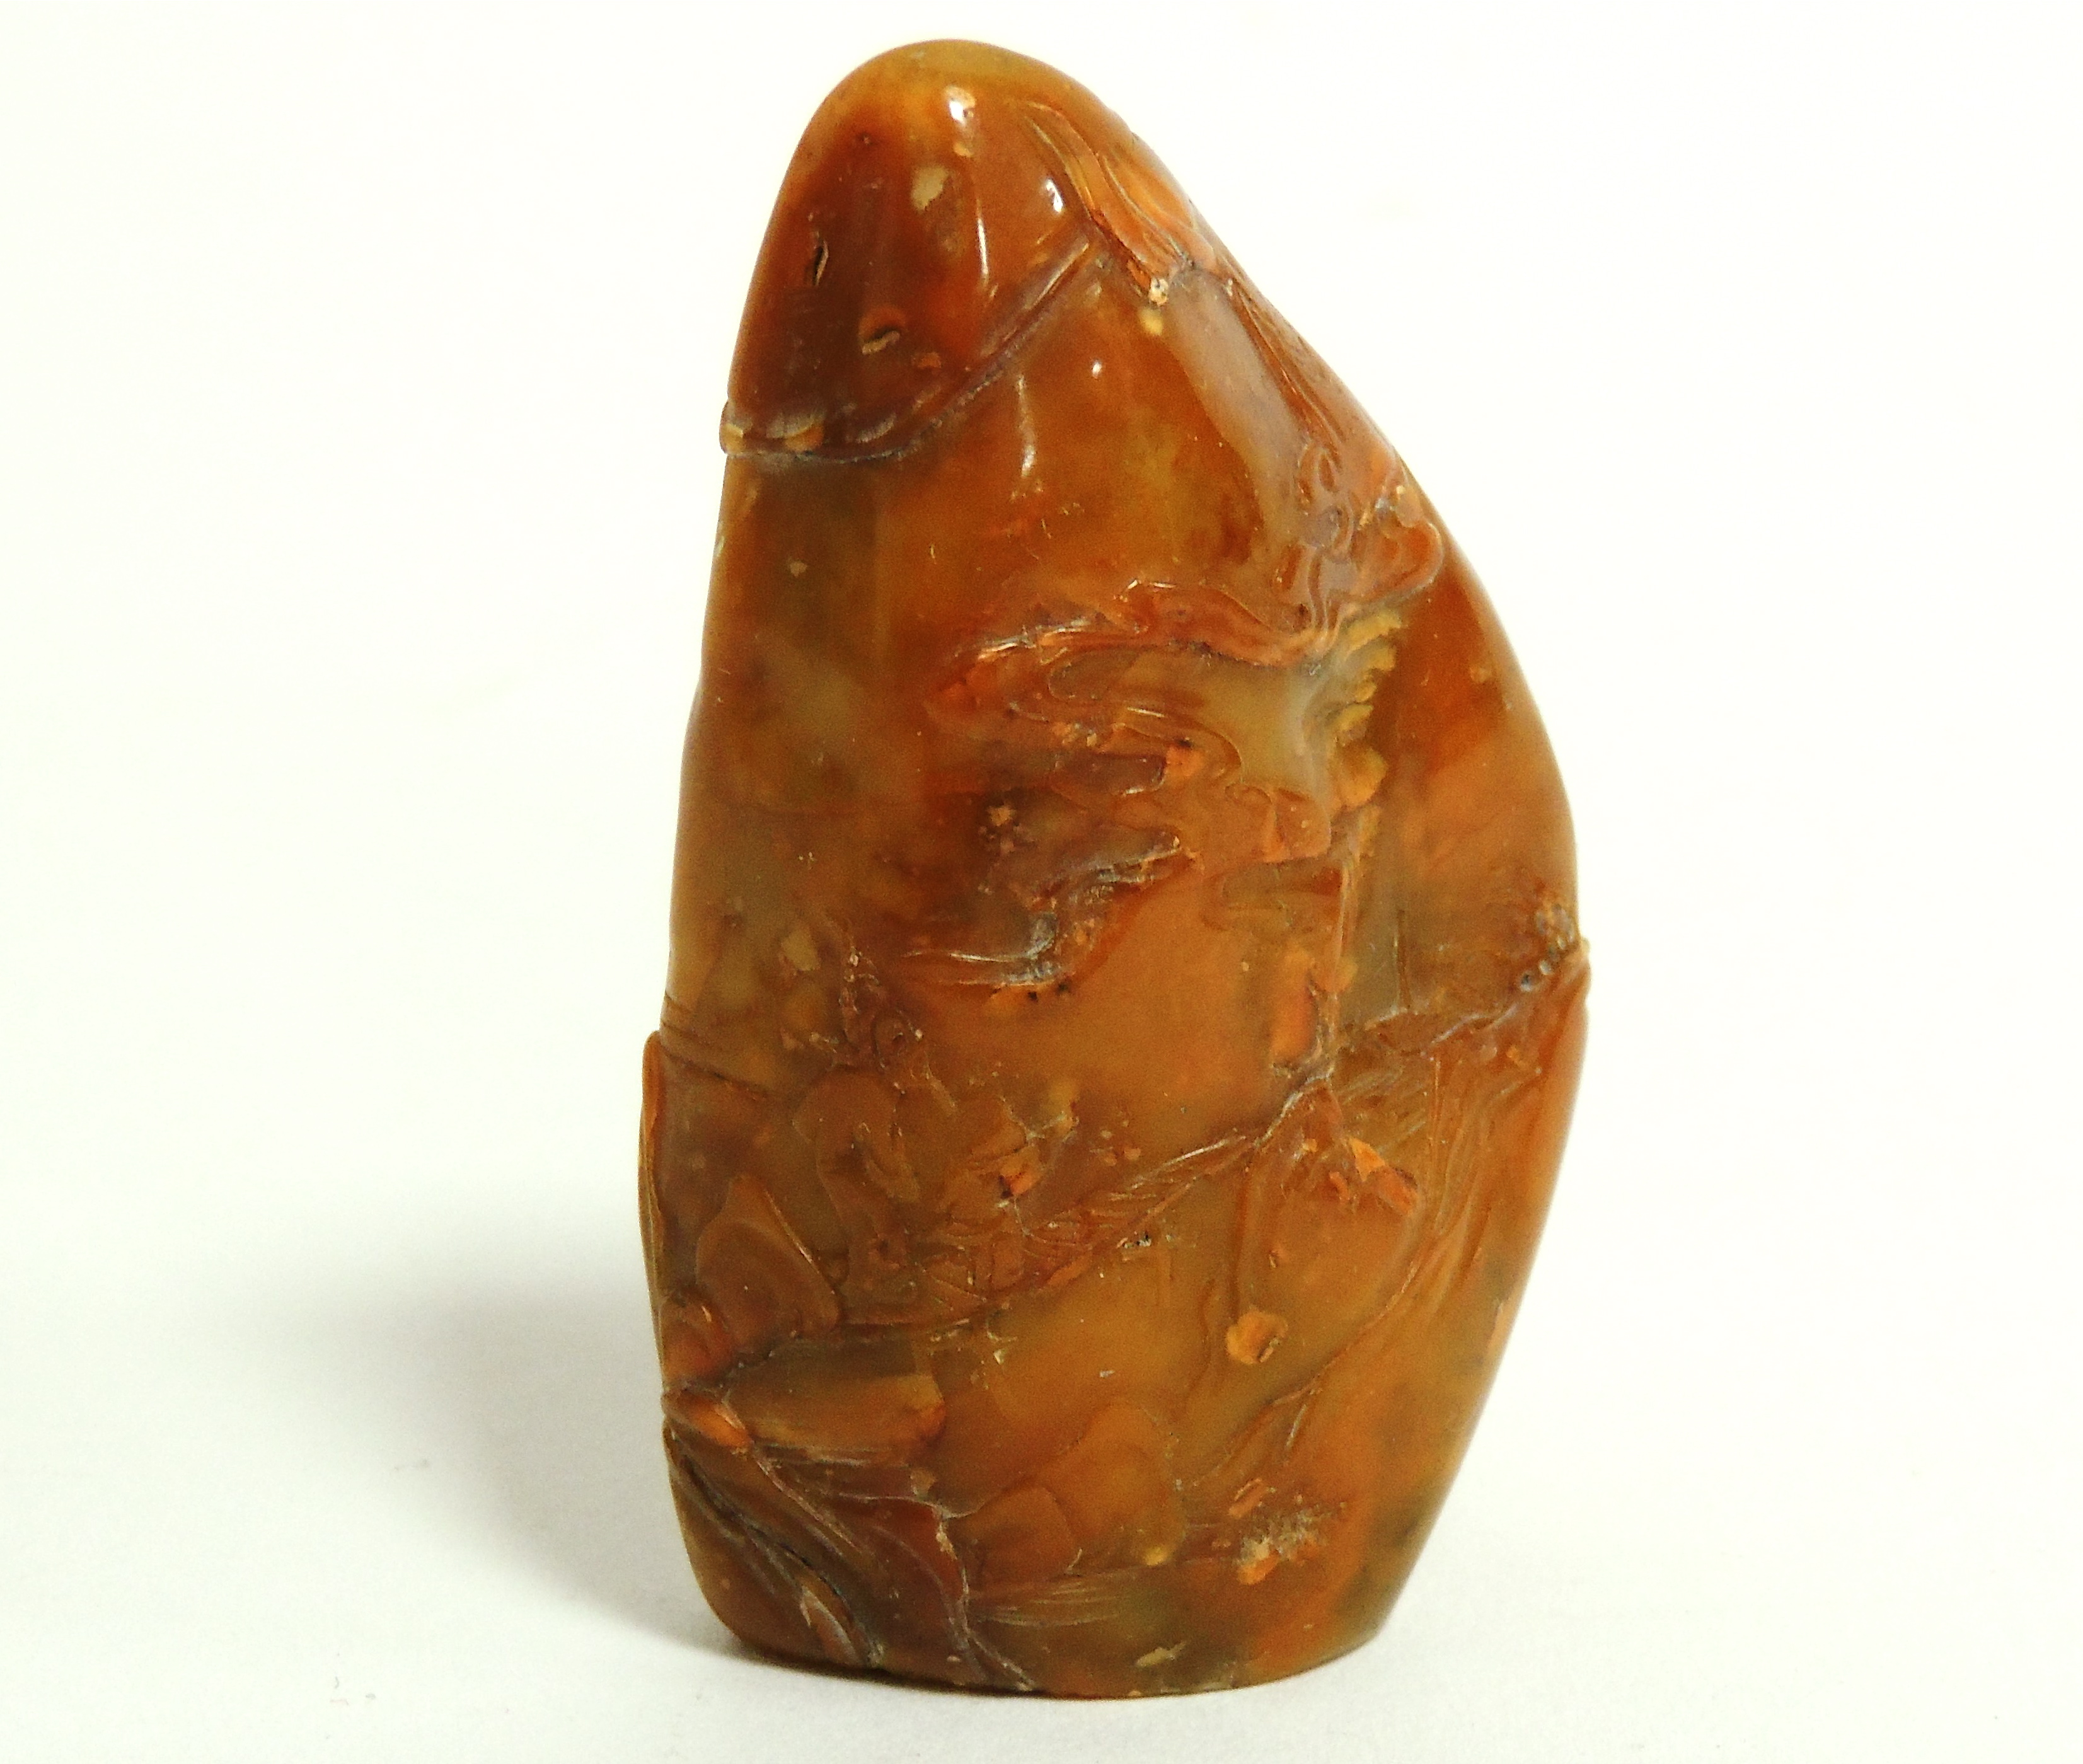 A Chinese Jadeite carving of near arrow head shape, with carved figures in a continuous